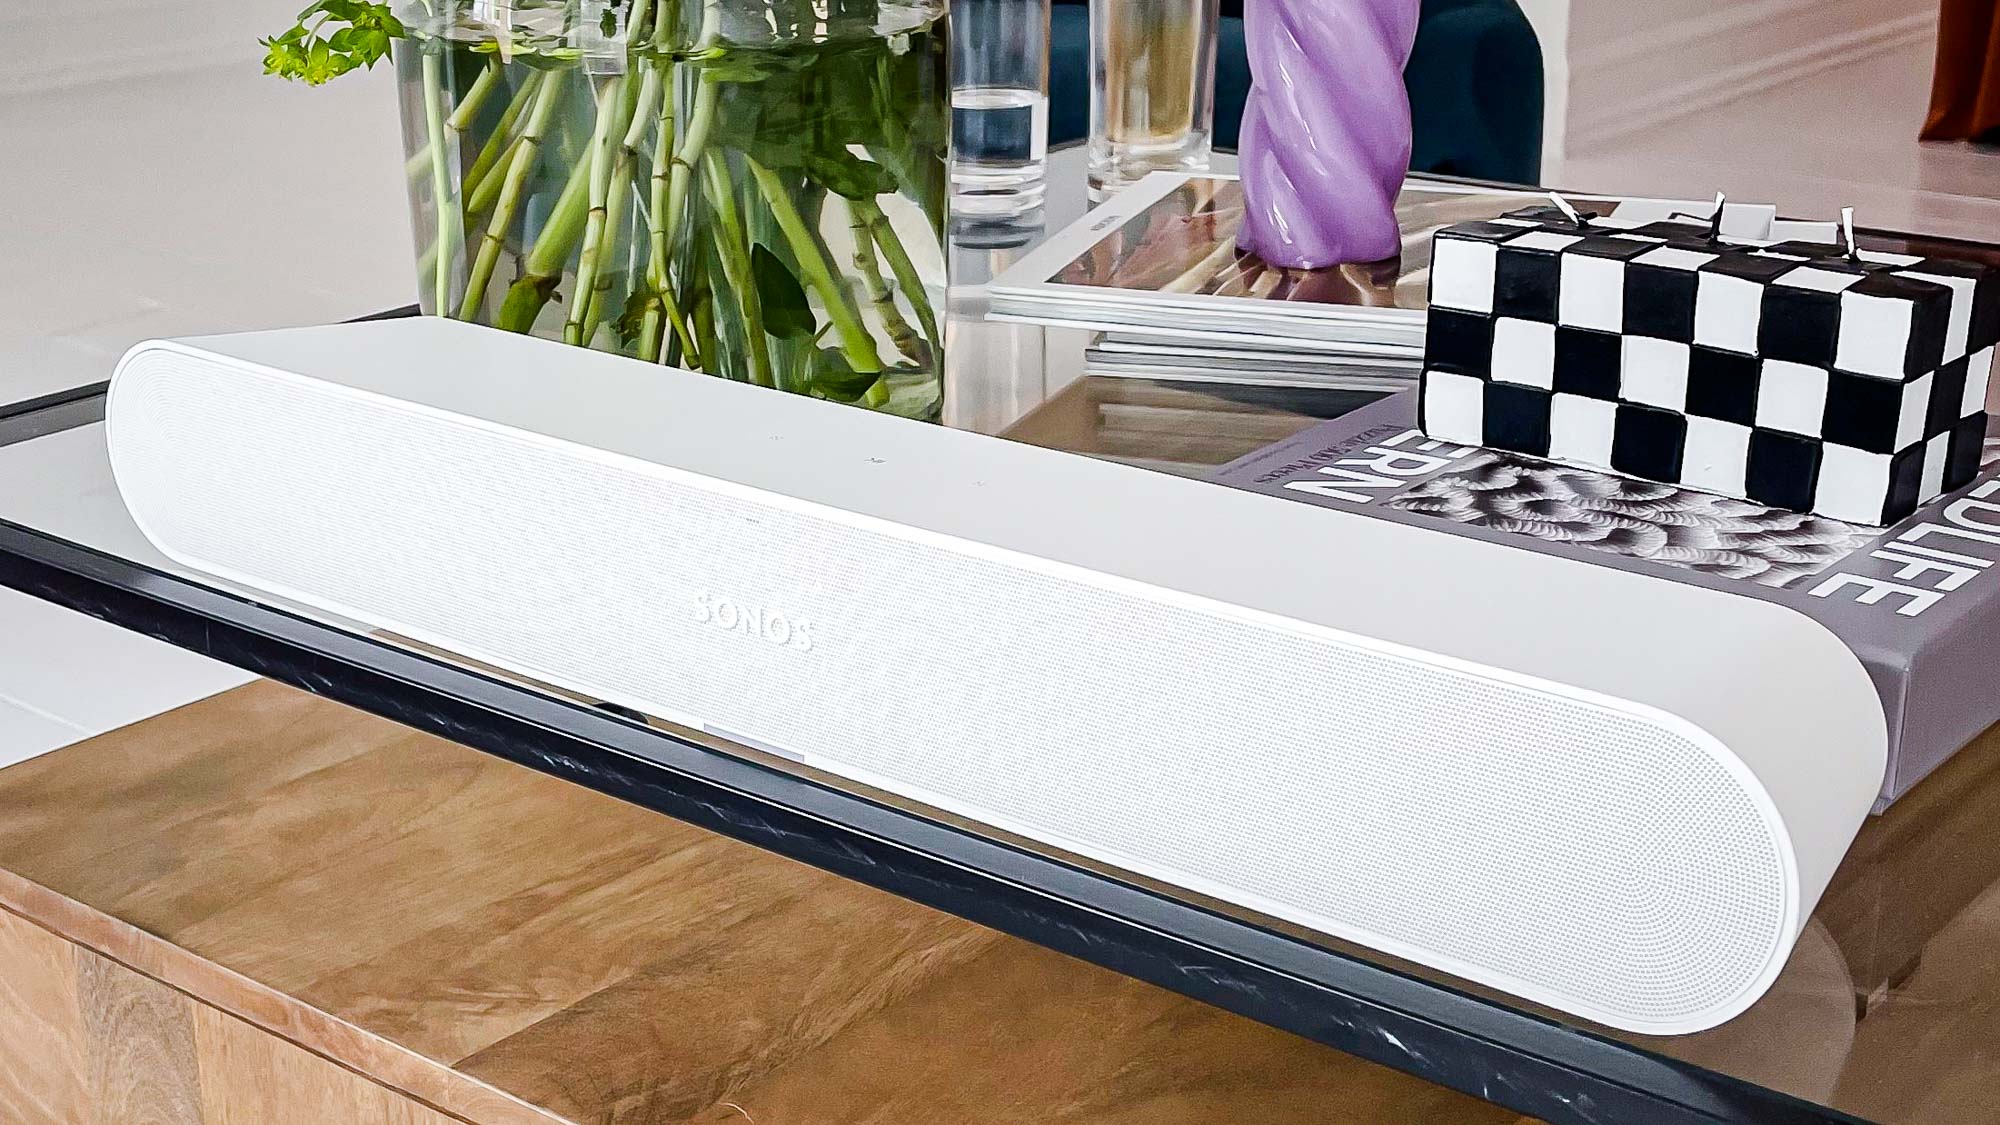 Sonos Ray review: A compact soundbar that's big on sound | Tom's Guide